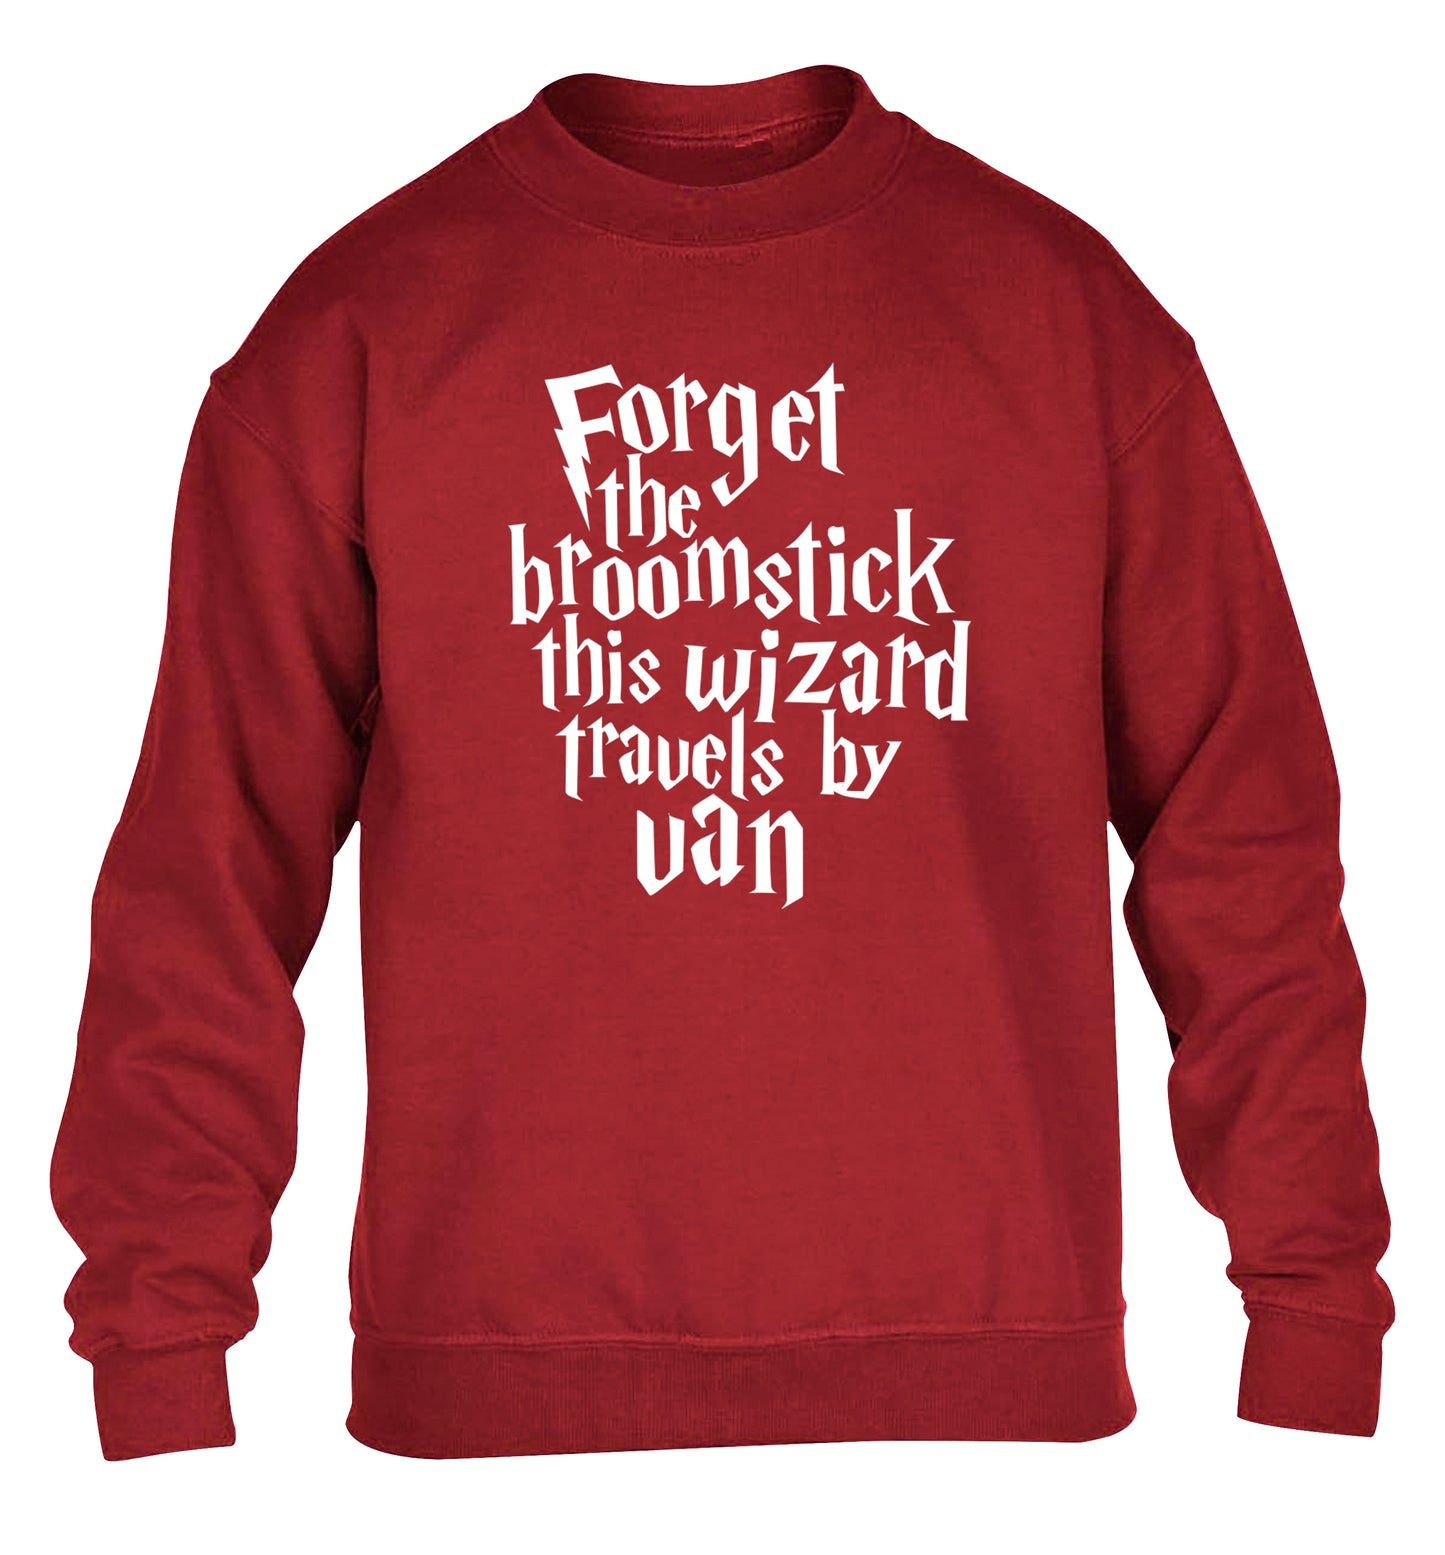 Forget the broomstick this wizard travels by van children's grey sweater 12-14 Years